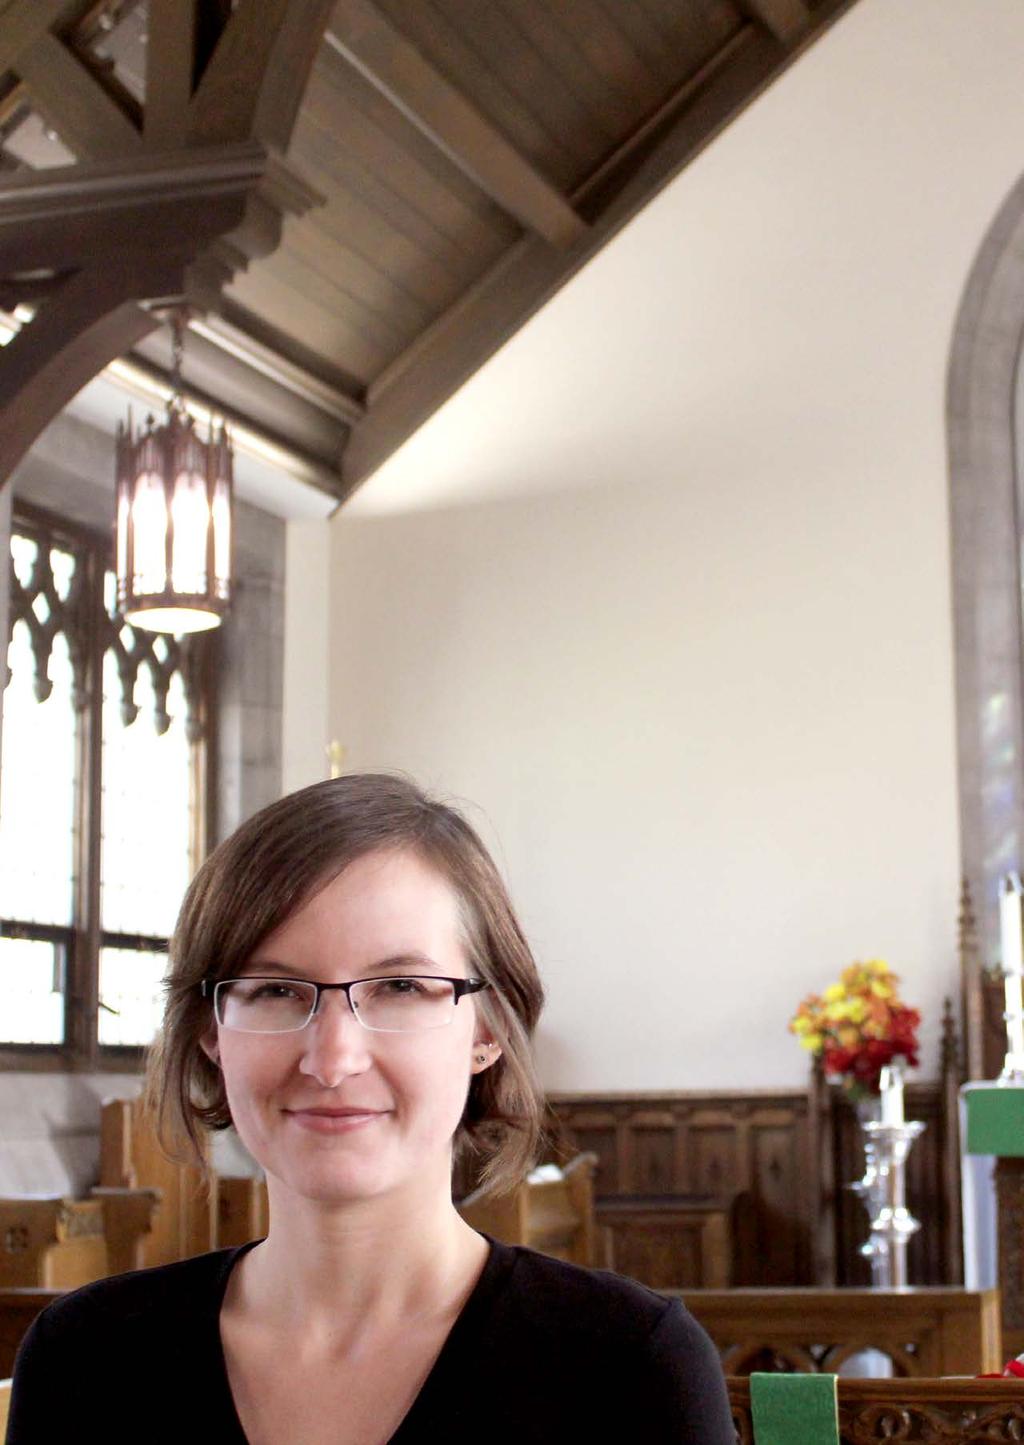 THE HURON ADVANTAGE ROSEMARY PARKER MDIV 17 Priest, Anglican Diocese of Ottawa Huron s Faculty of Theology brings together individuals of all ages with different backgrounds, beliefs, and levels of